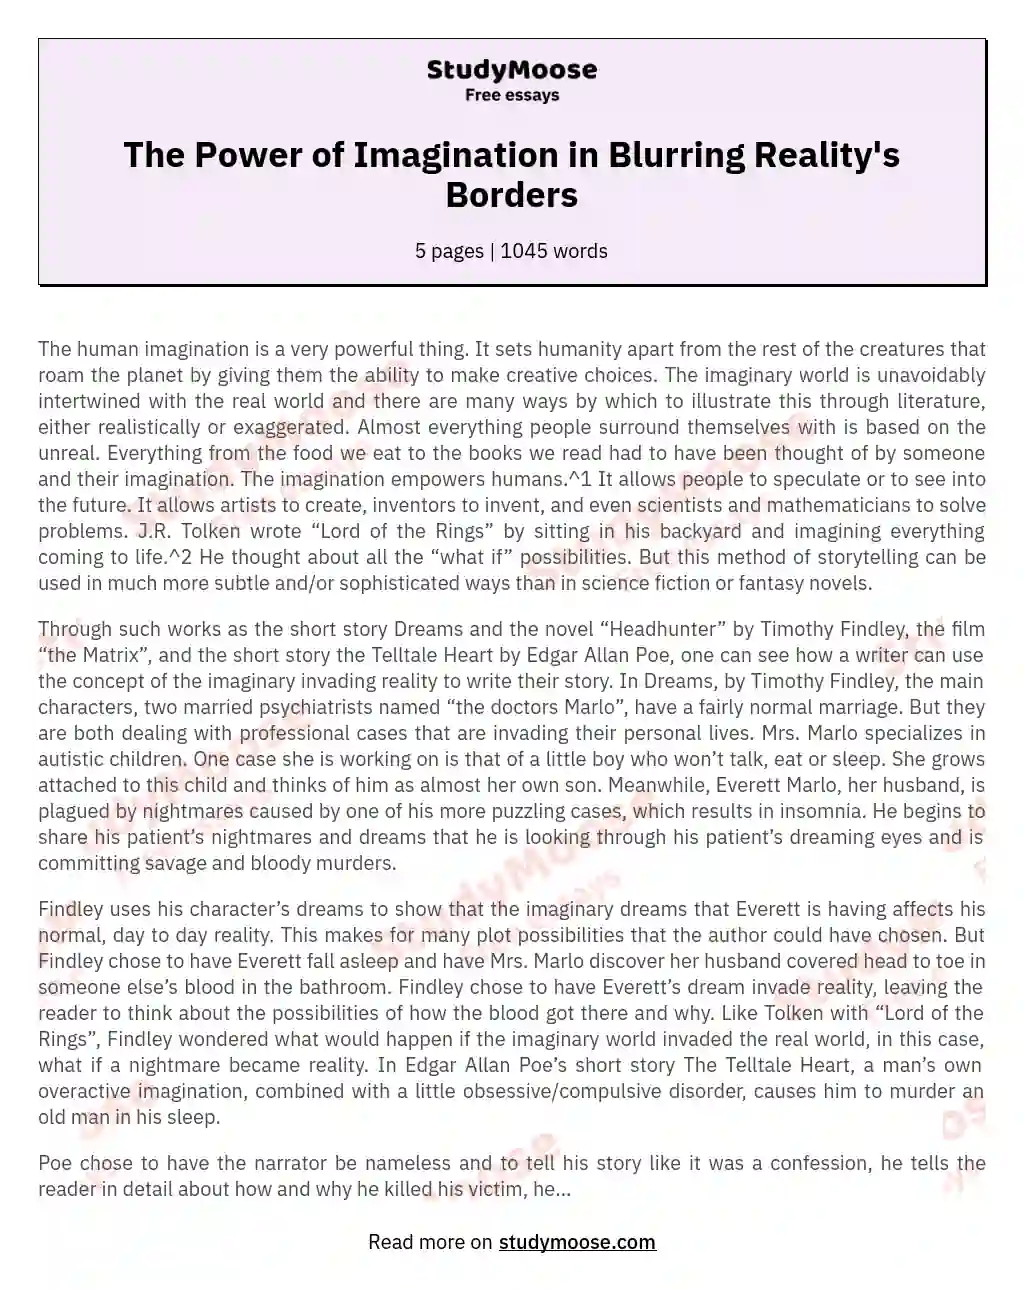 The Power of Imagination in Blurring Reality's Borders essay